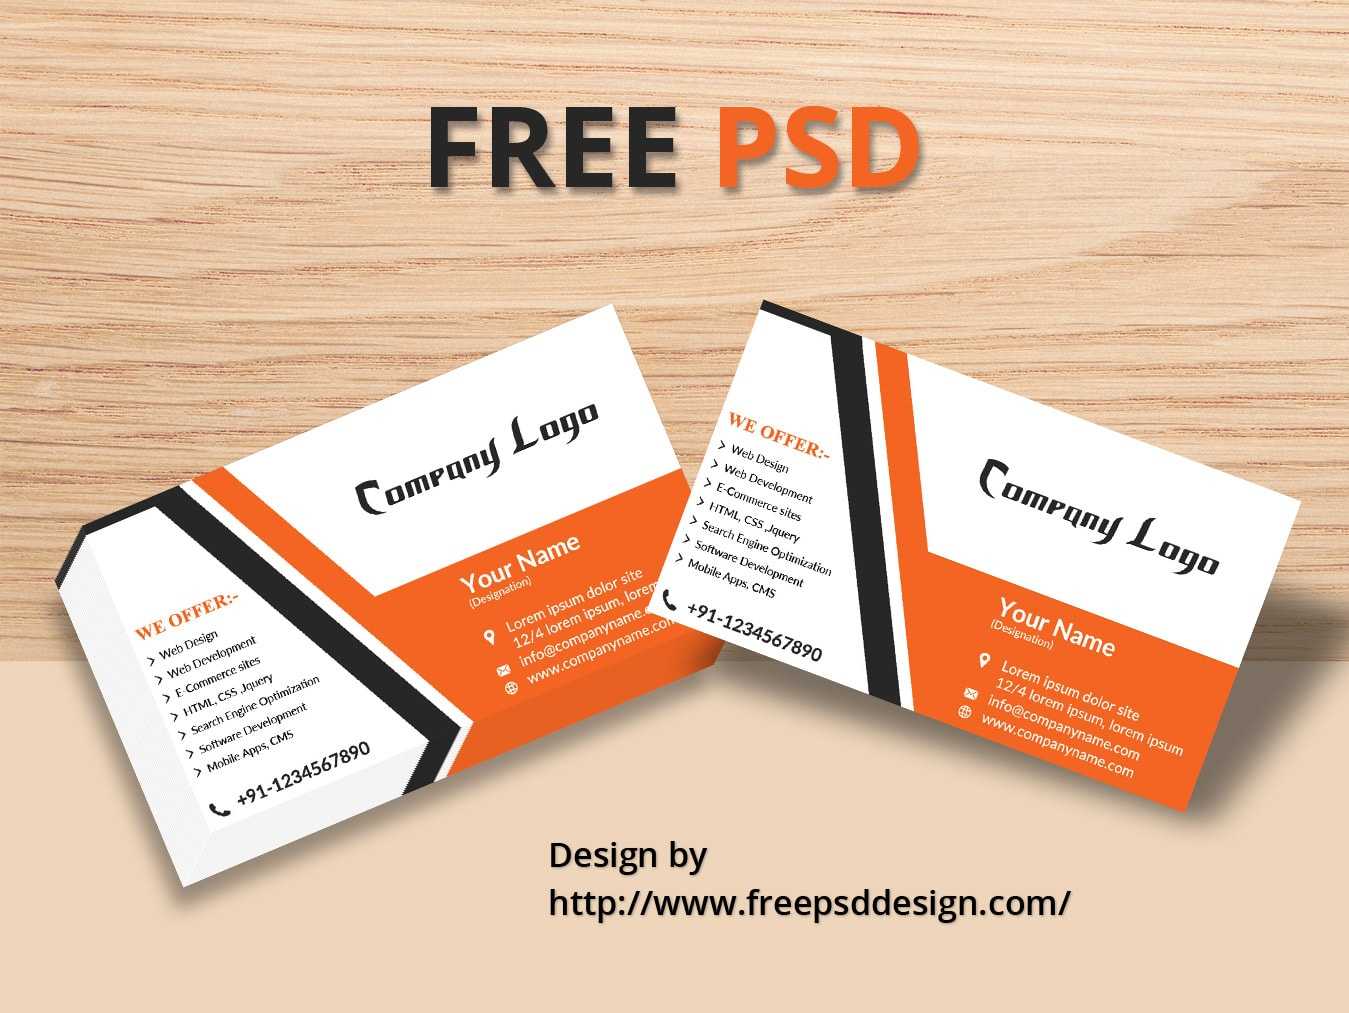 Free Psd Design Download | All Photoshop File | Html Css In Free Psd Visiting Card Templates Download